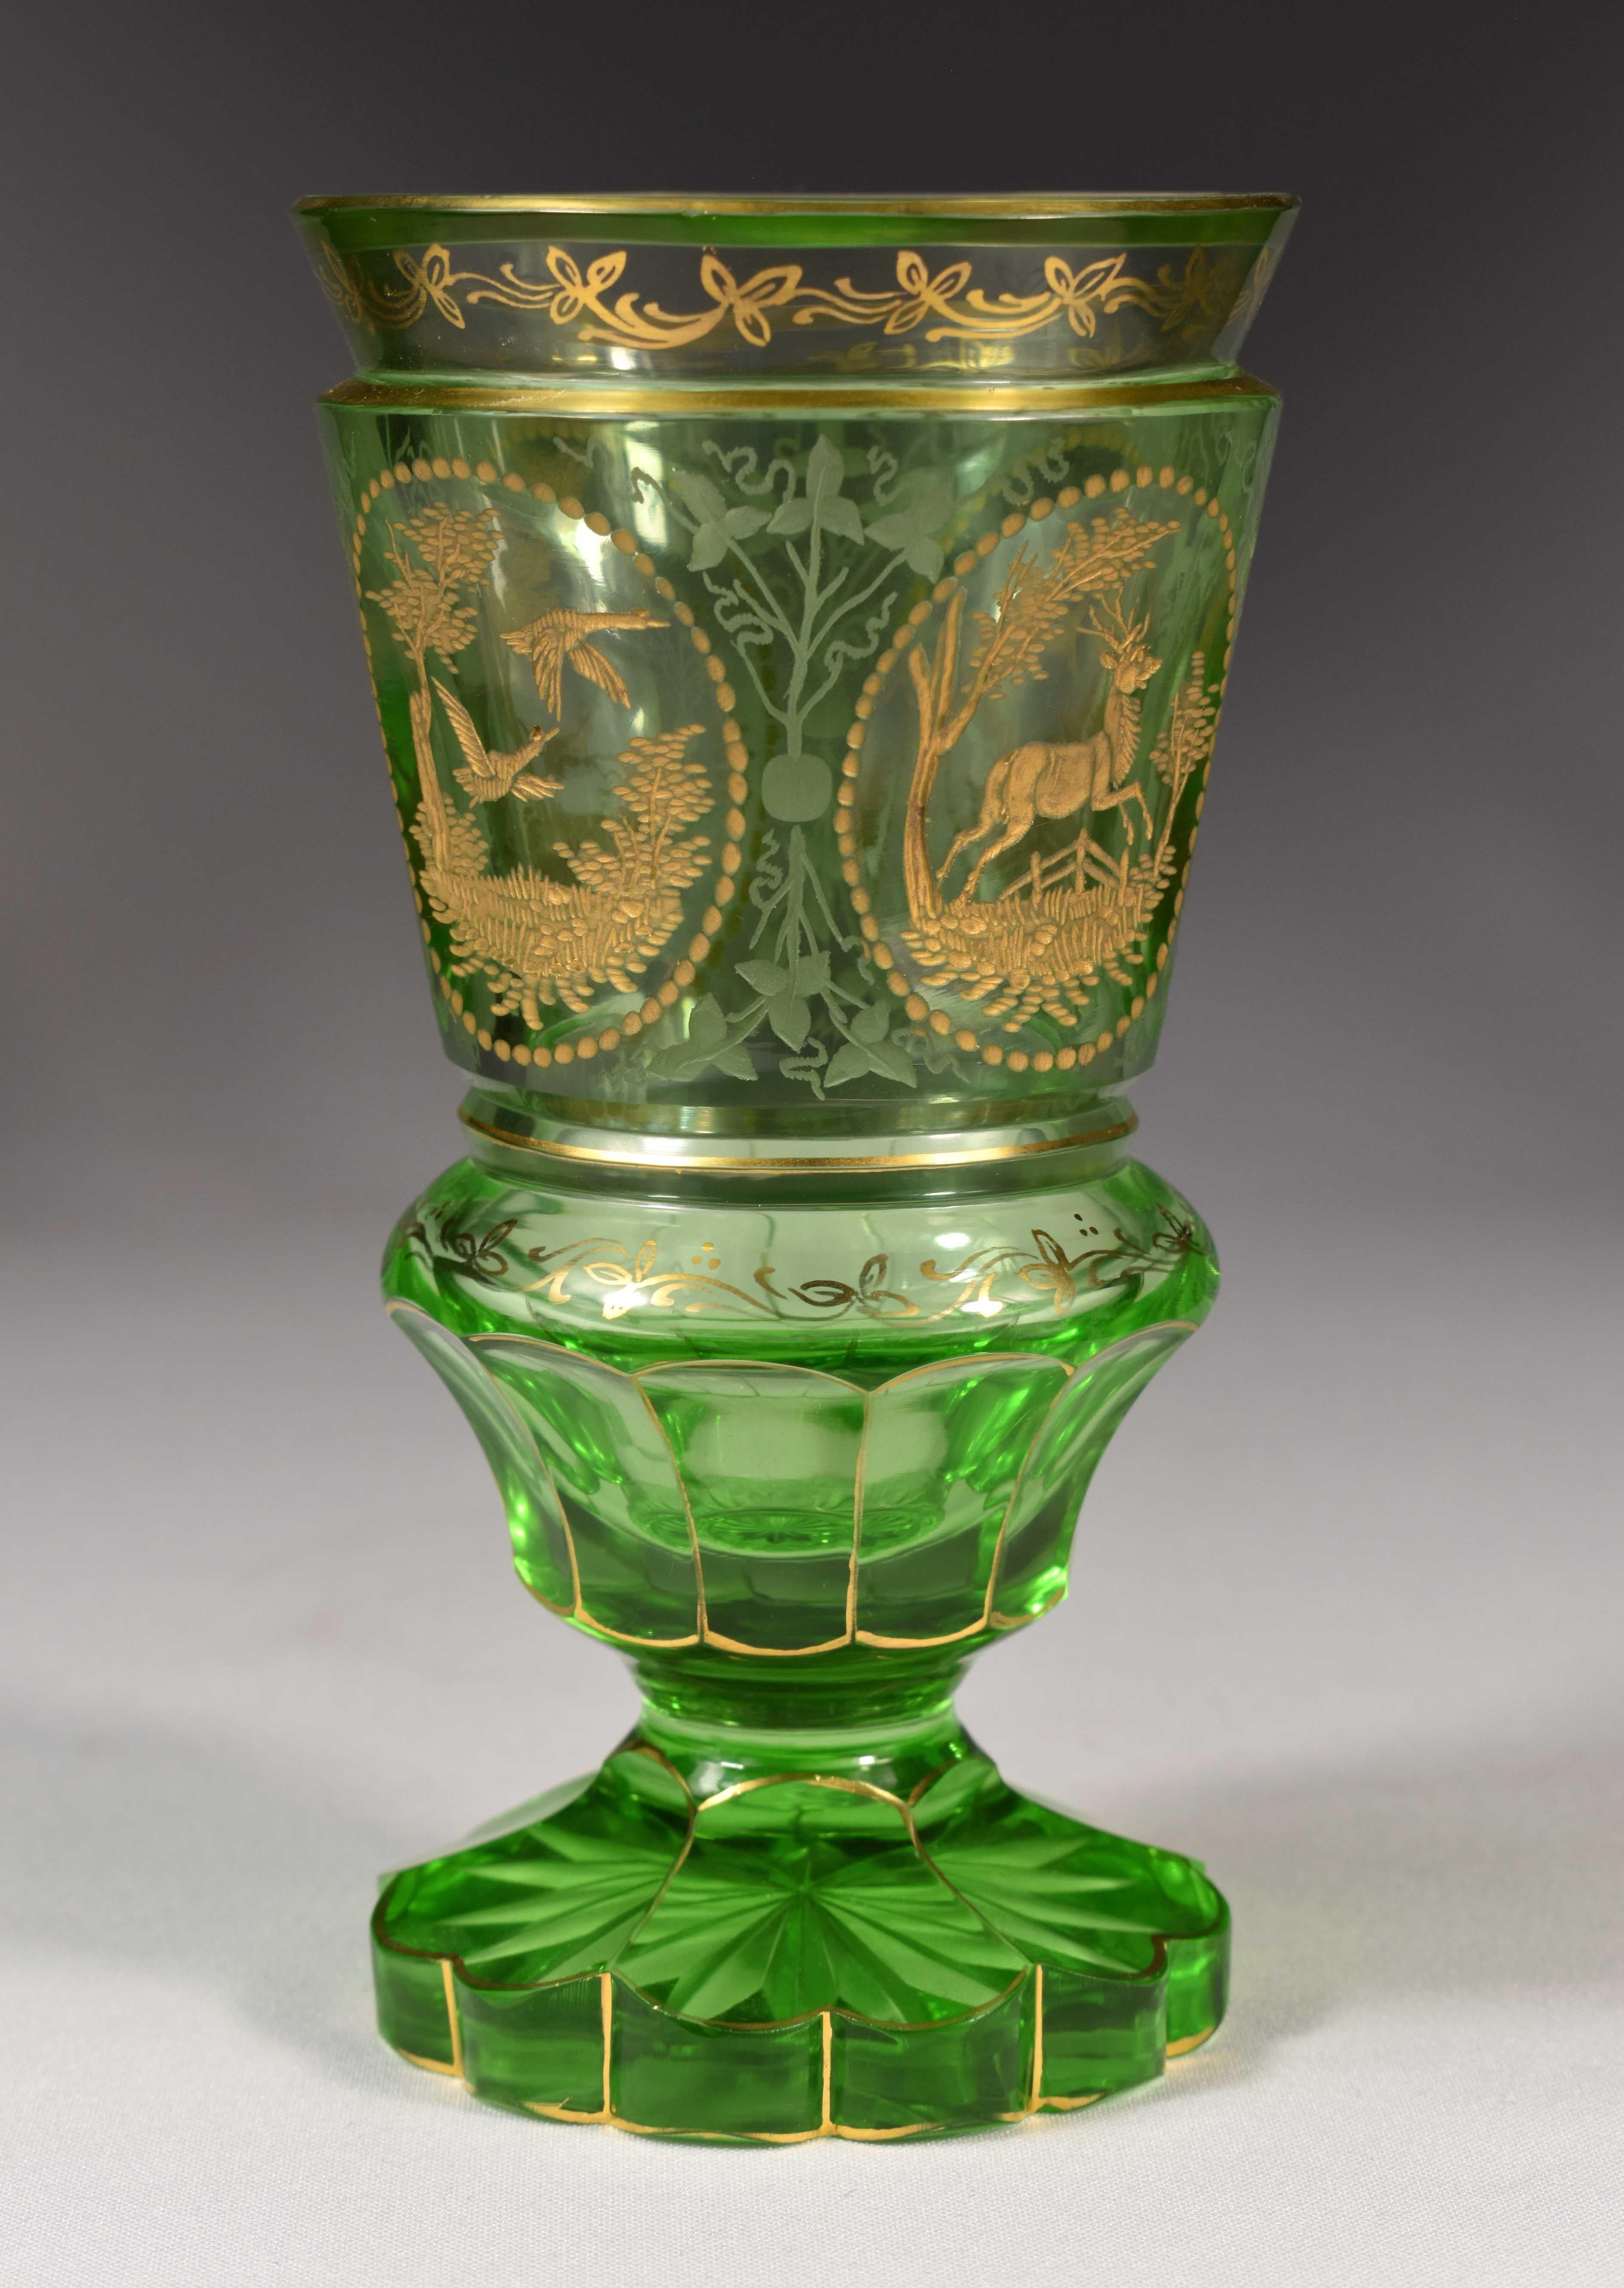 Beautiful cut engraved and gilded cup, hunting motifs, this is a Bohemian glass from the first half of the 20th century, the cup is undamaged.